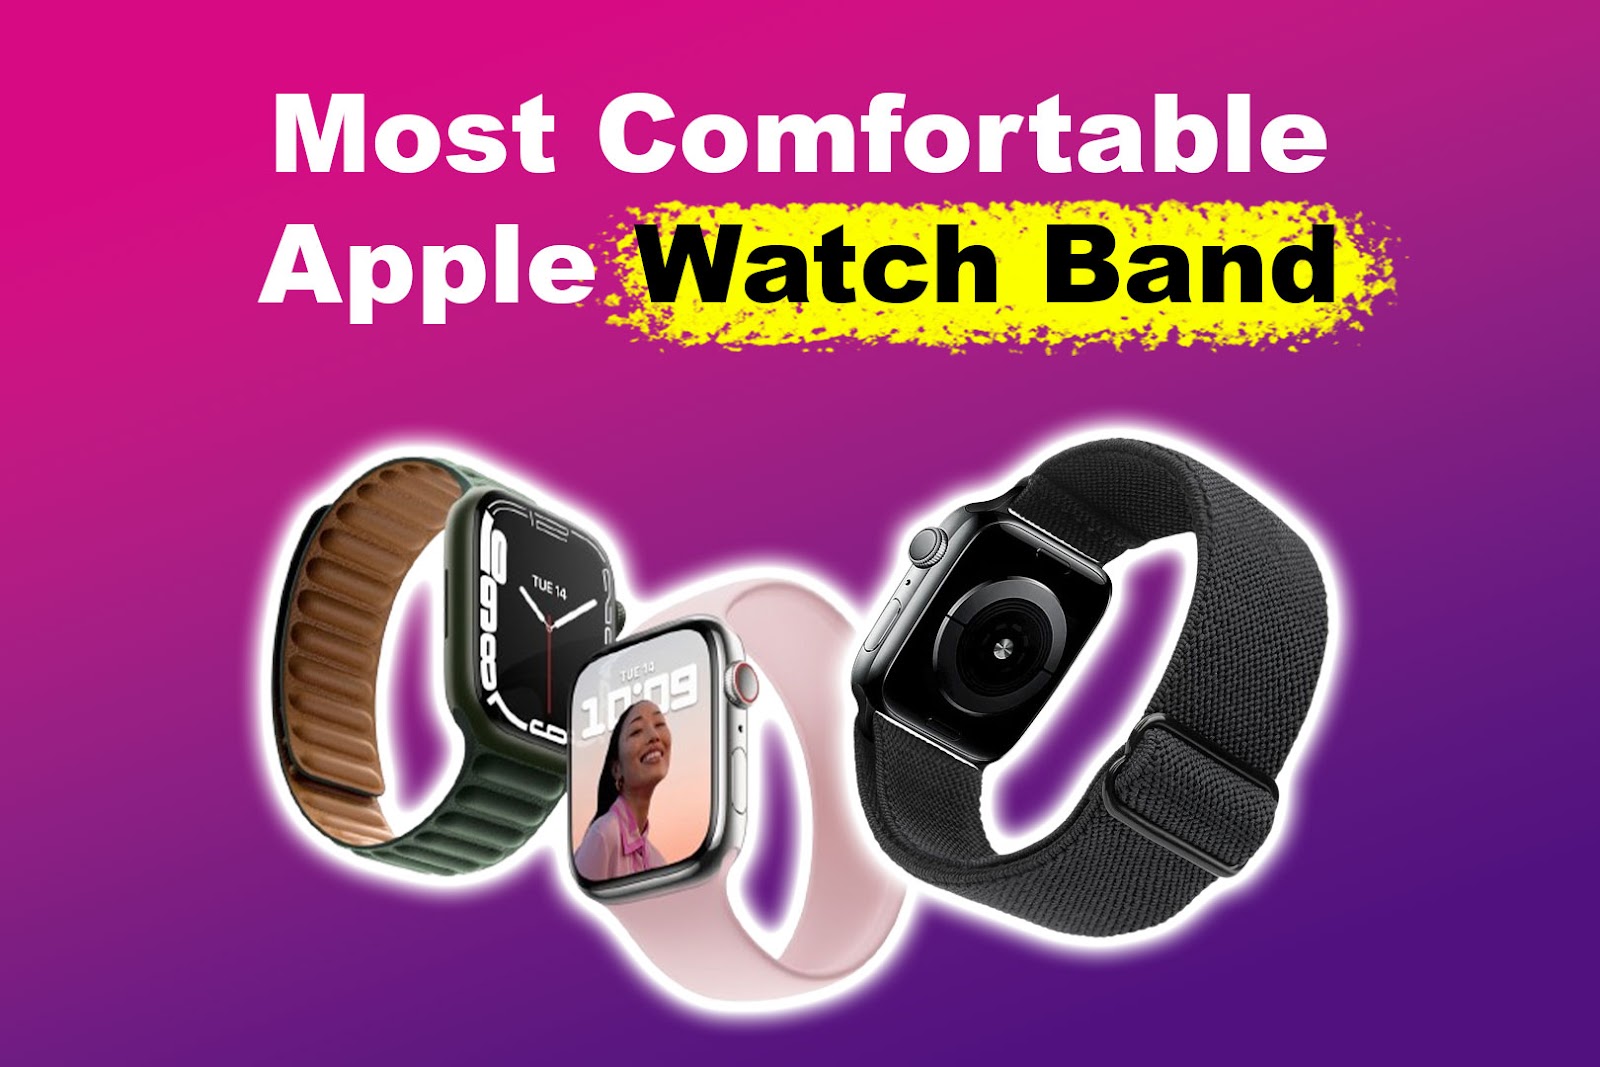 5 Most Comfortable Apple Watch Bands [+ Getting the Right Fit]